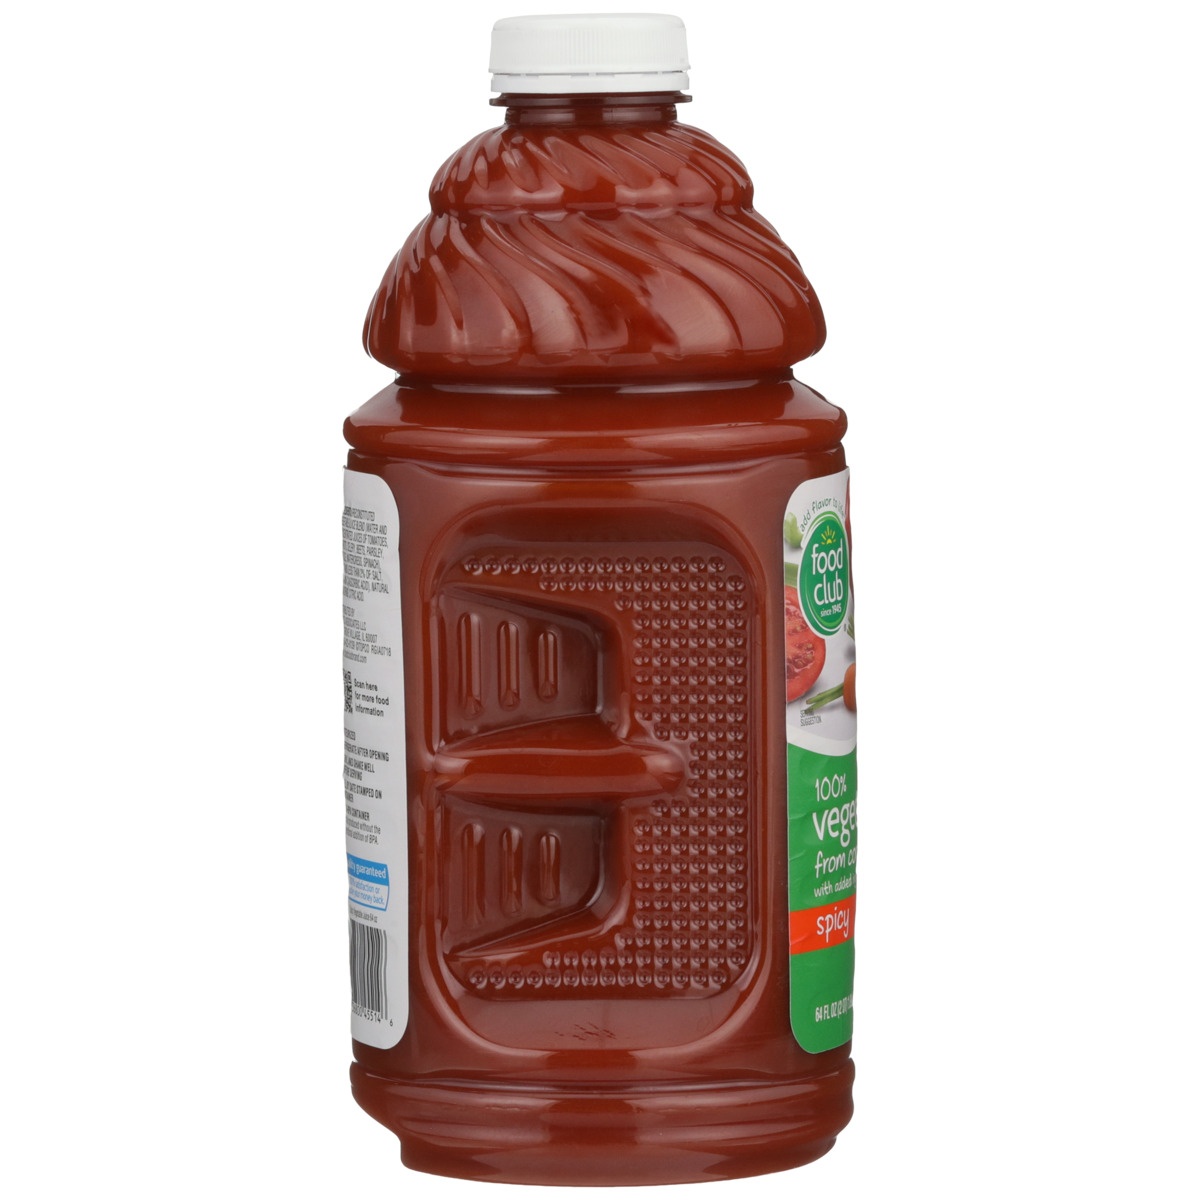 slide 7 of 10, Food Club 100% Spicy Vegetable Juice From Concentrate, 64 fl oz